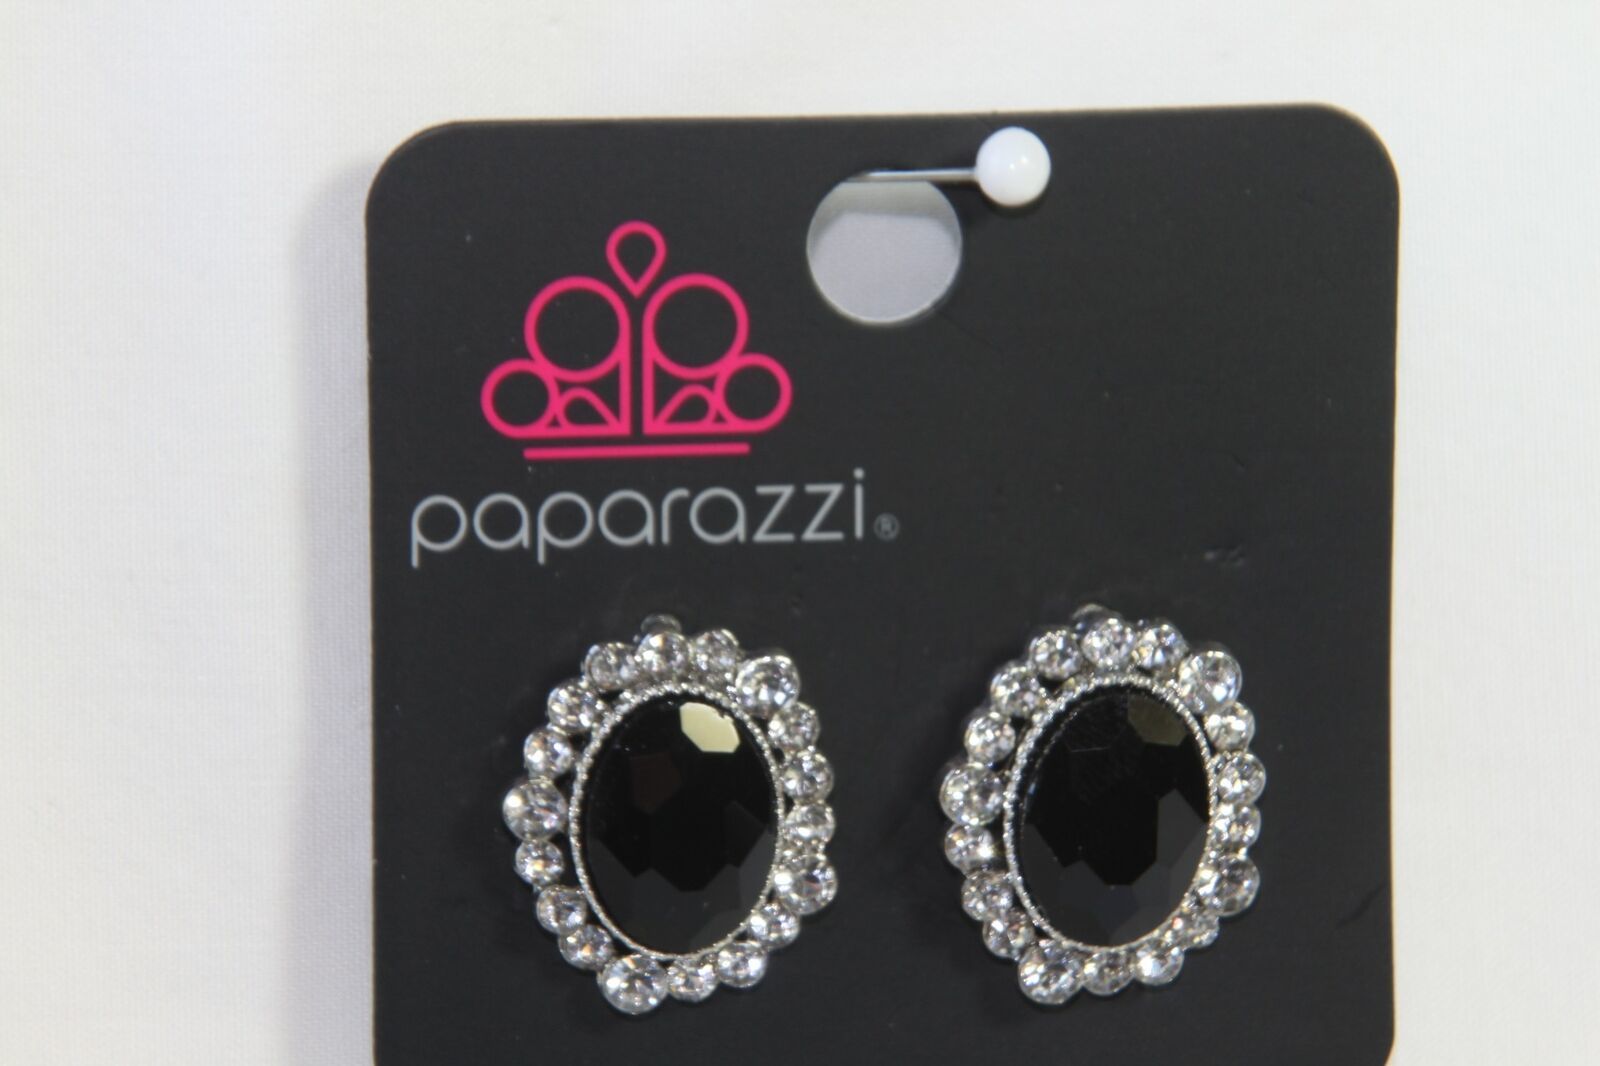 Primary image for Paparazzi Earrings (new) HOLD COURT - BLACK - OVAL SHAPED - POST EARRING